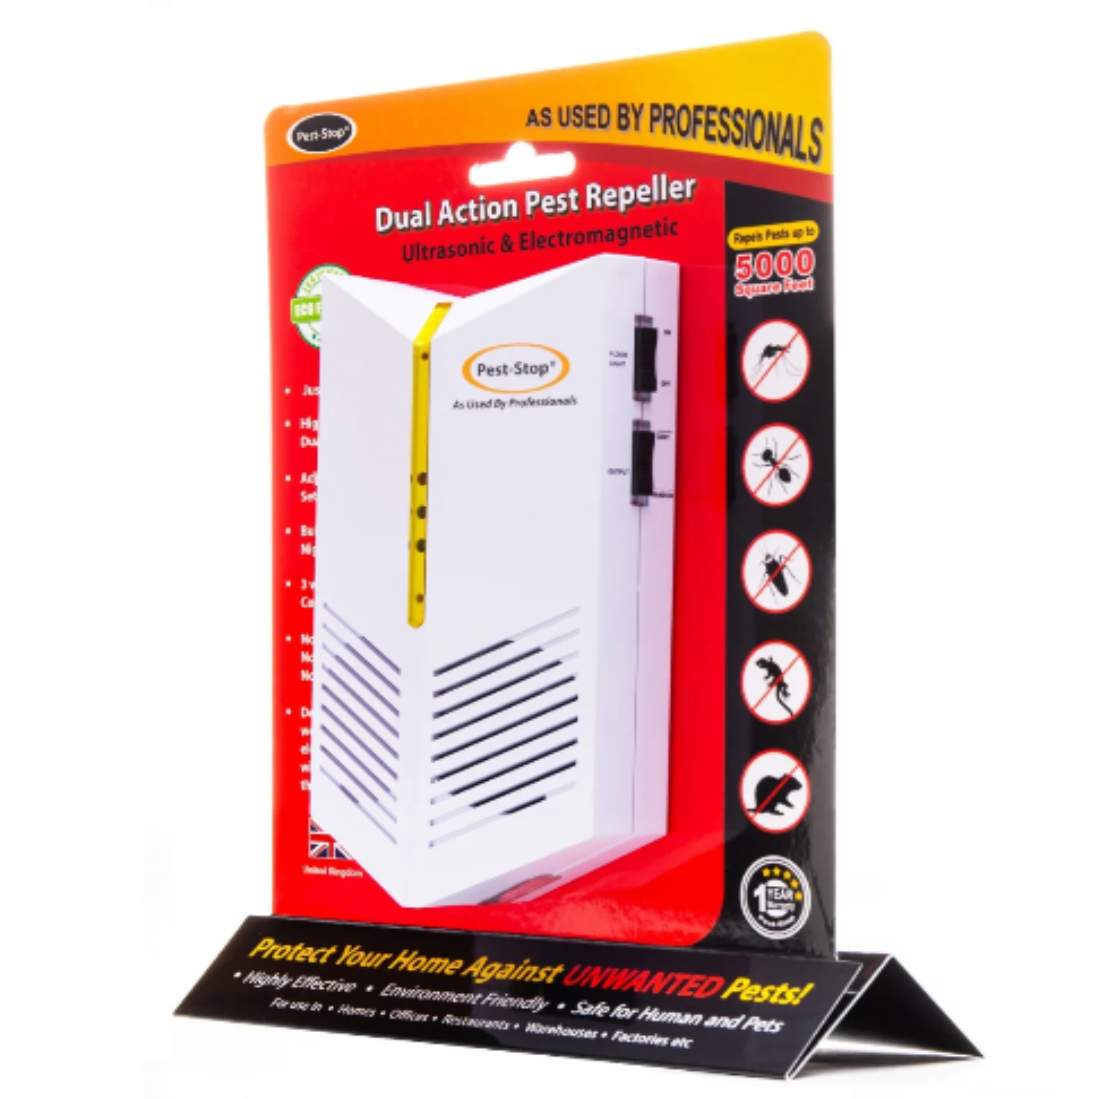 OLEE DUAL ACTION Pest Repeller PEST STOP 5000